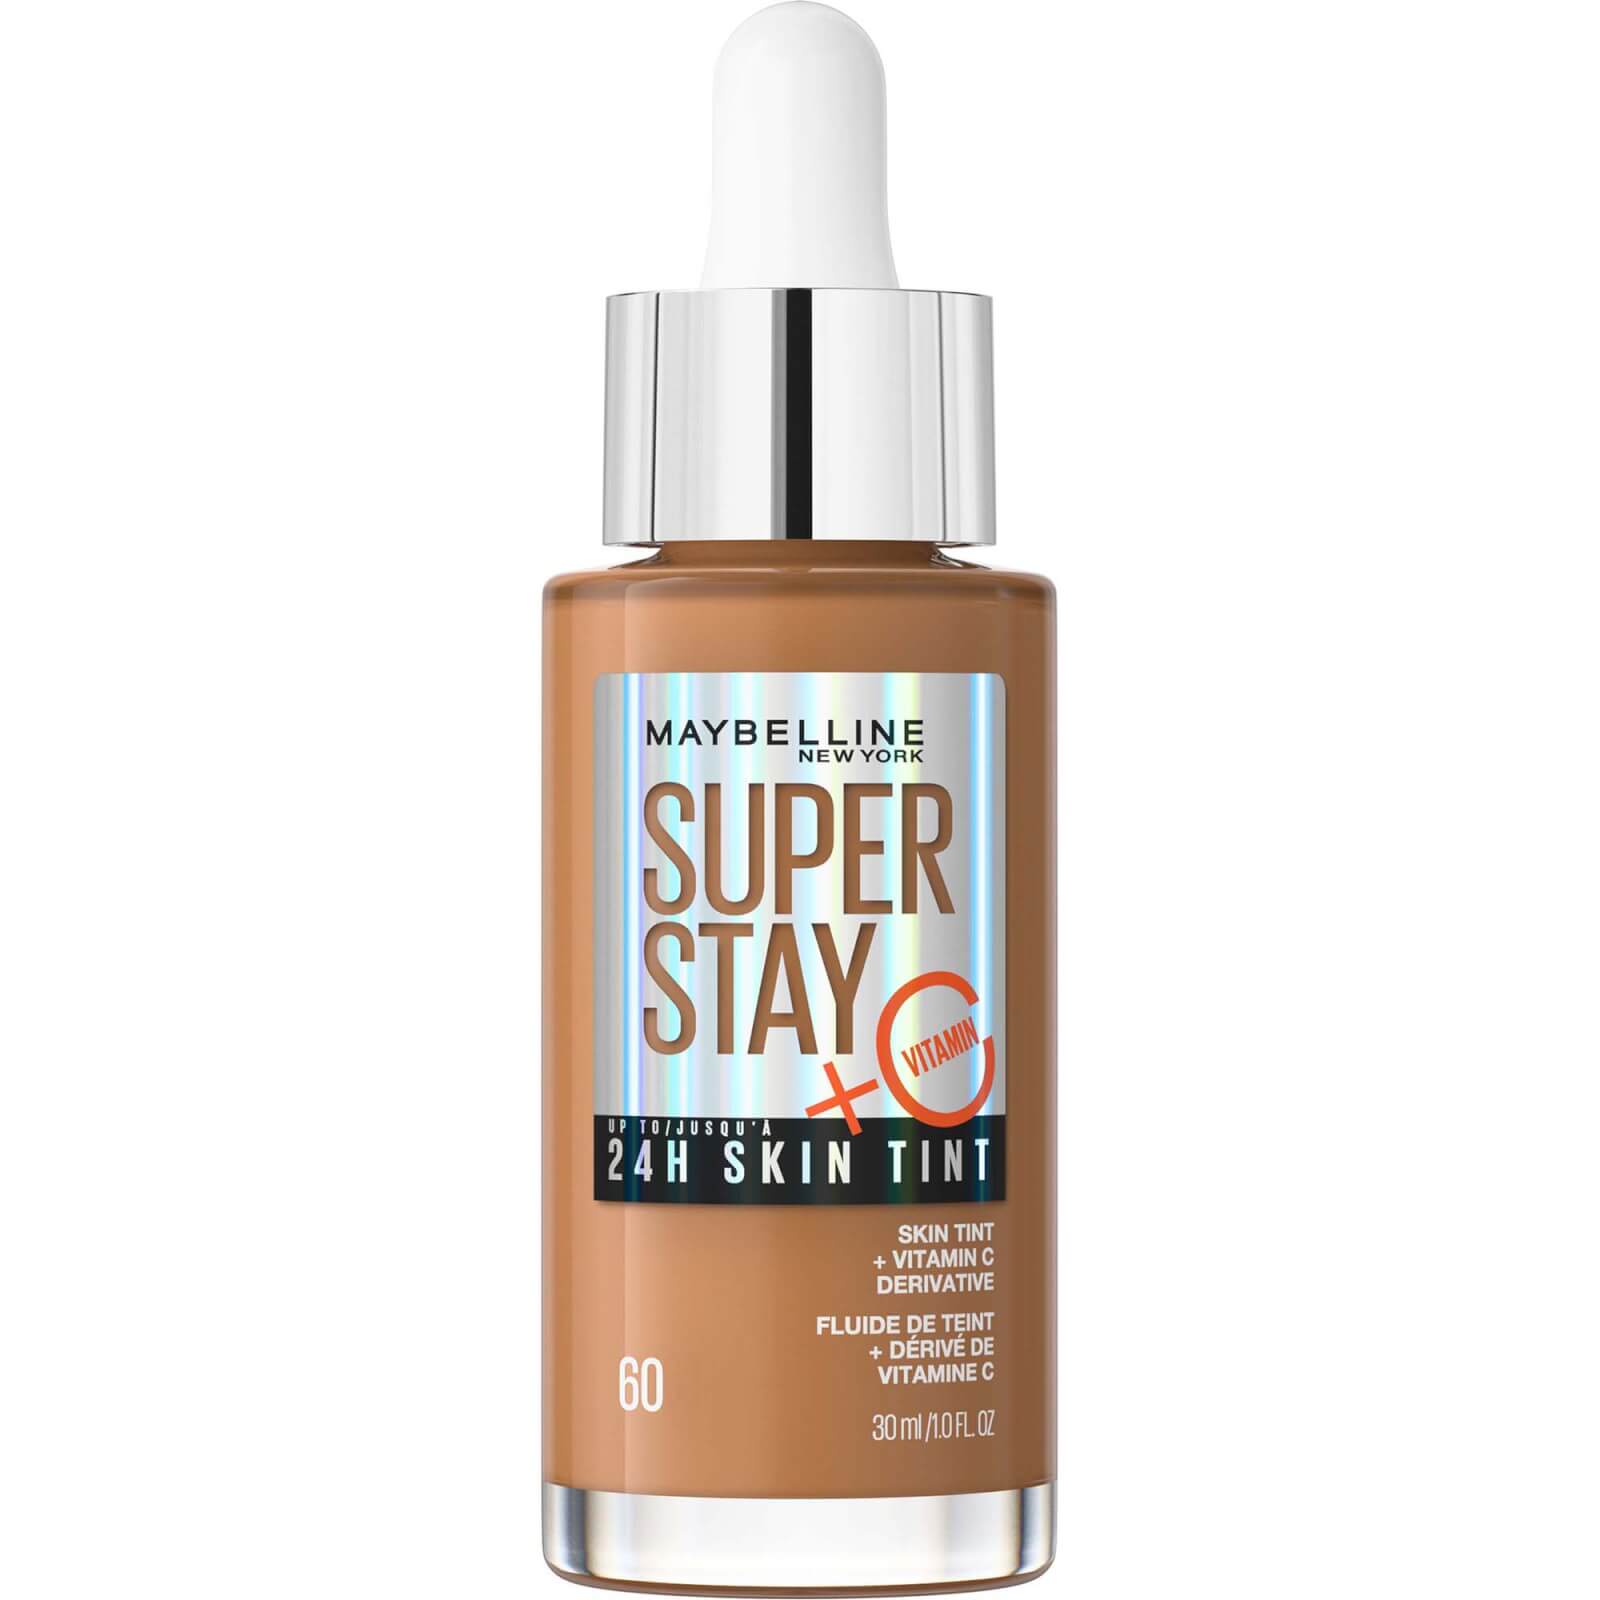 Maybelline Super Stay Up To 24h Skin Tint Foundation + Vitamin C 30ml (various Shades) - 60 In Brown